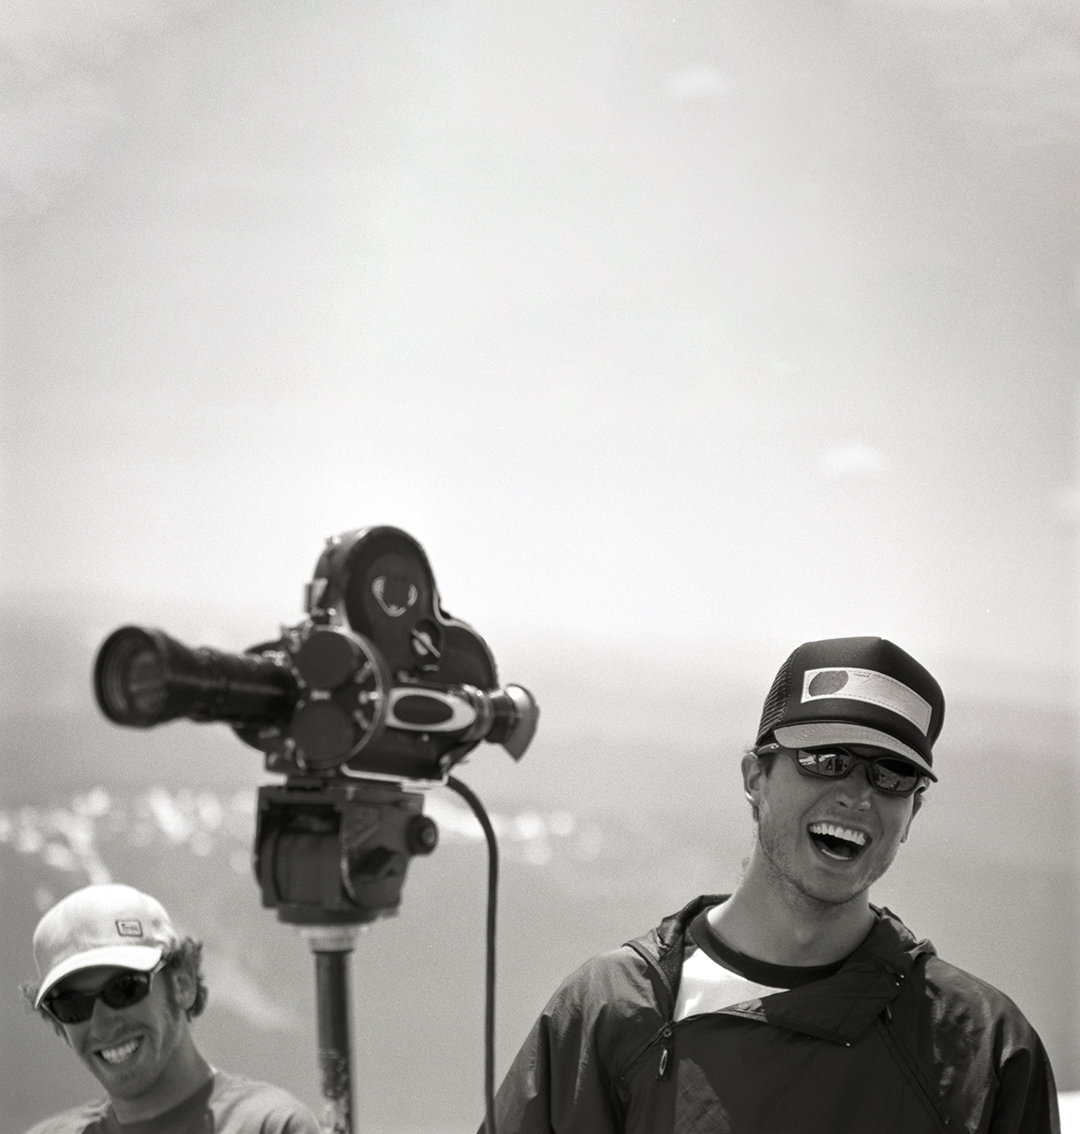 Eric Iberg, now of Excelsior, is shown at Mount Hood in Oregon in 2002 while filming his second movie, Stereotype.